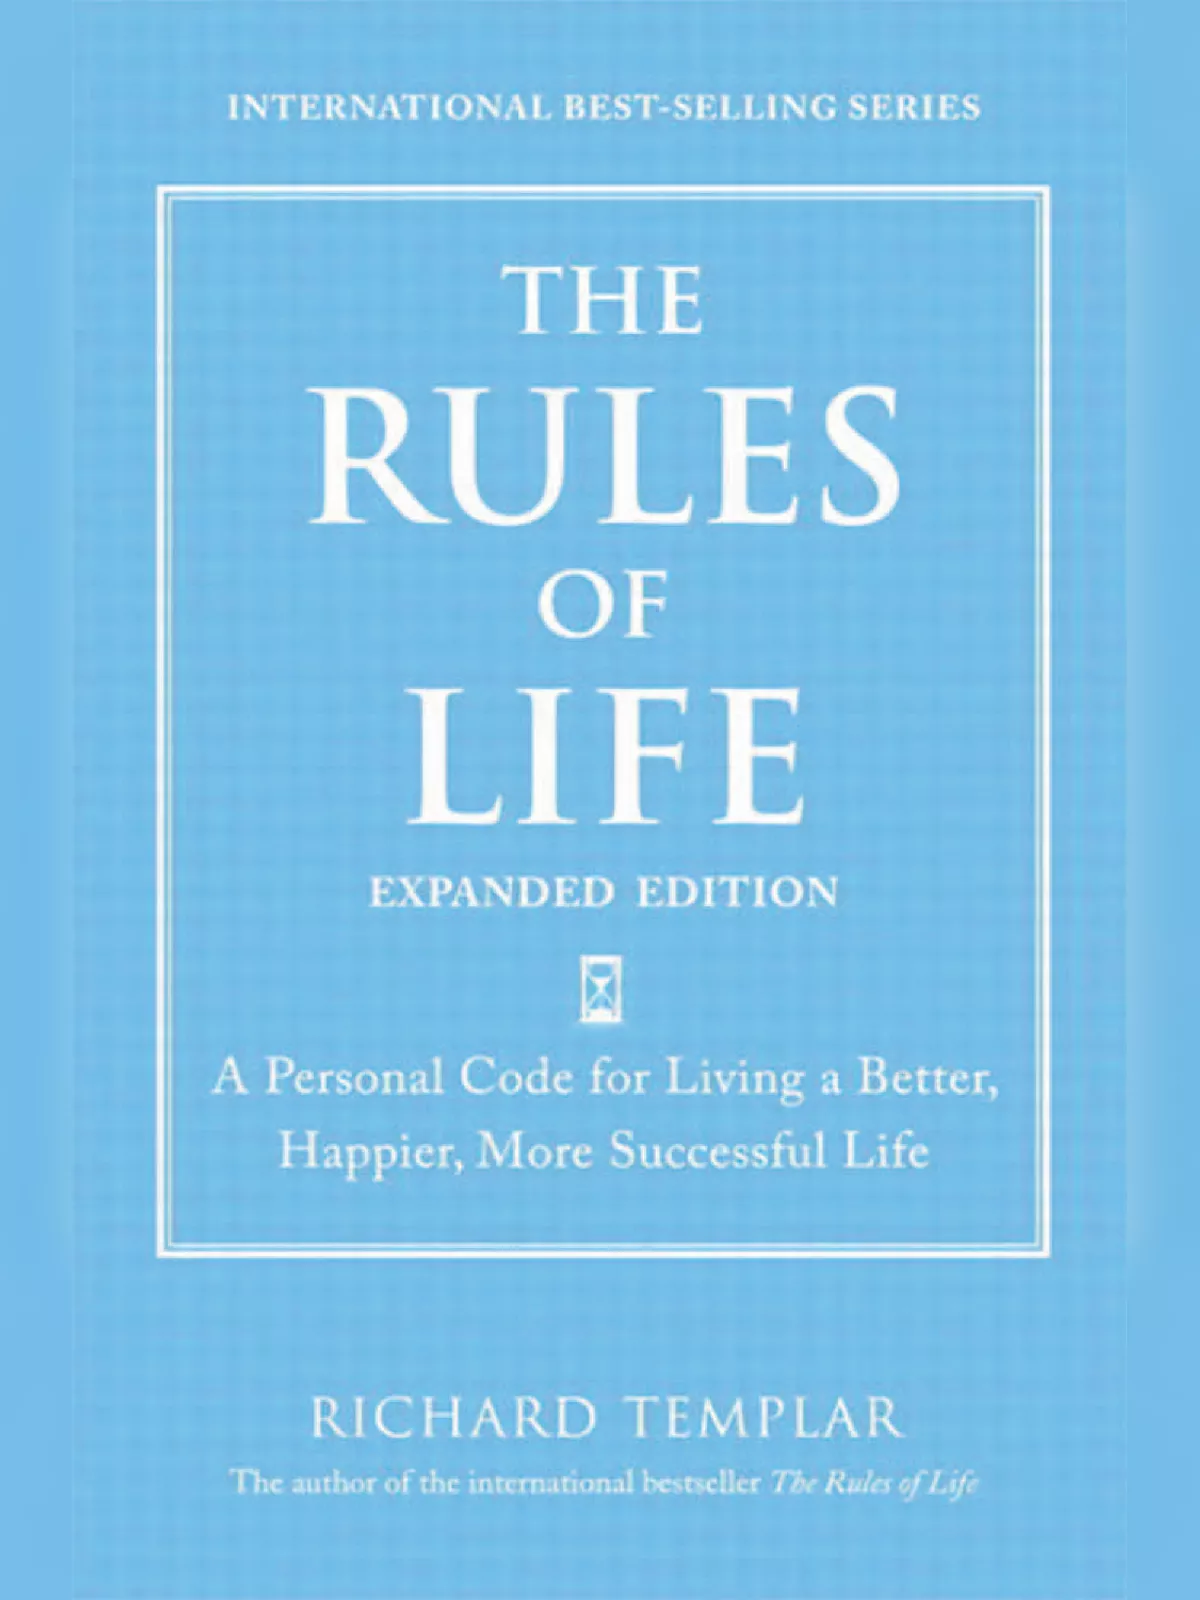 The Rules of Life Book